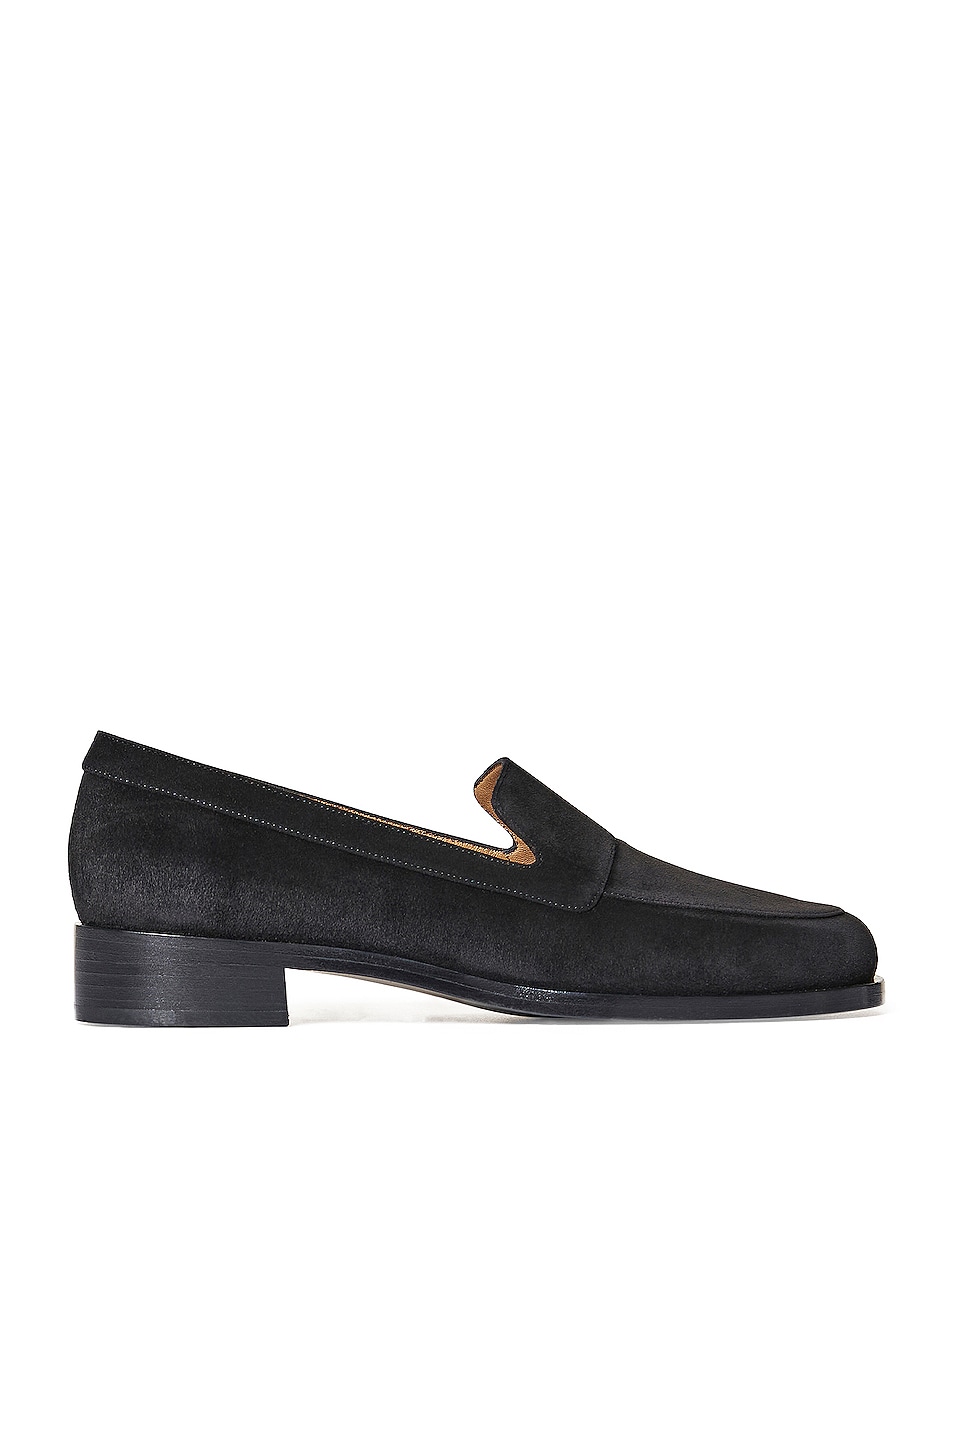 Image 1 of The Row Garcon Suede Loafers in Black